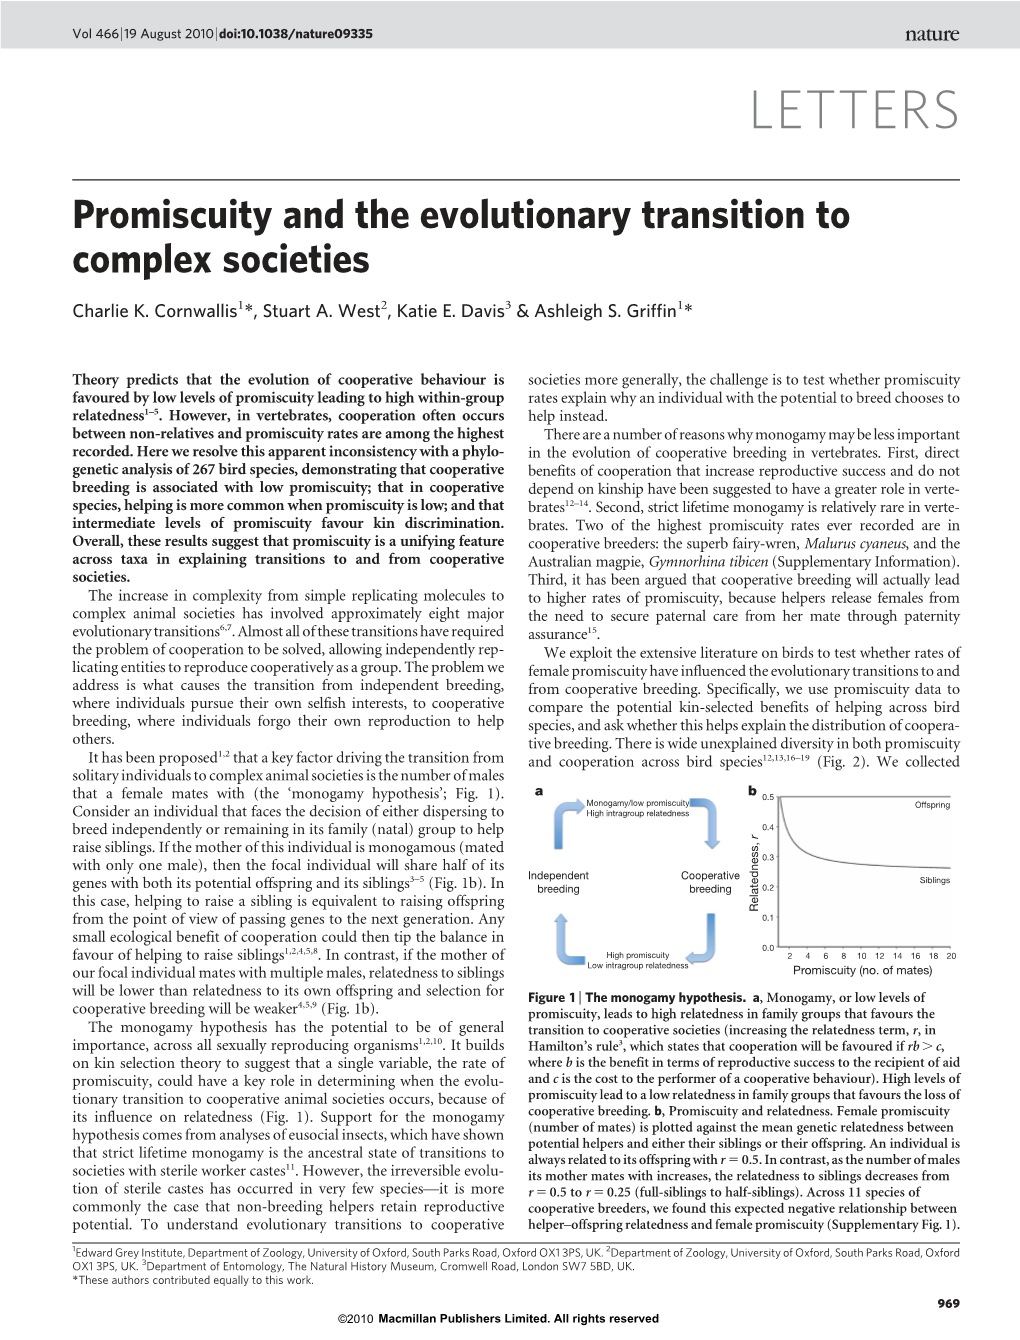 Promiscuity and the Evolutionary Transition to Complex Societies